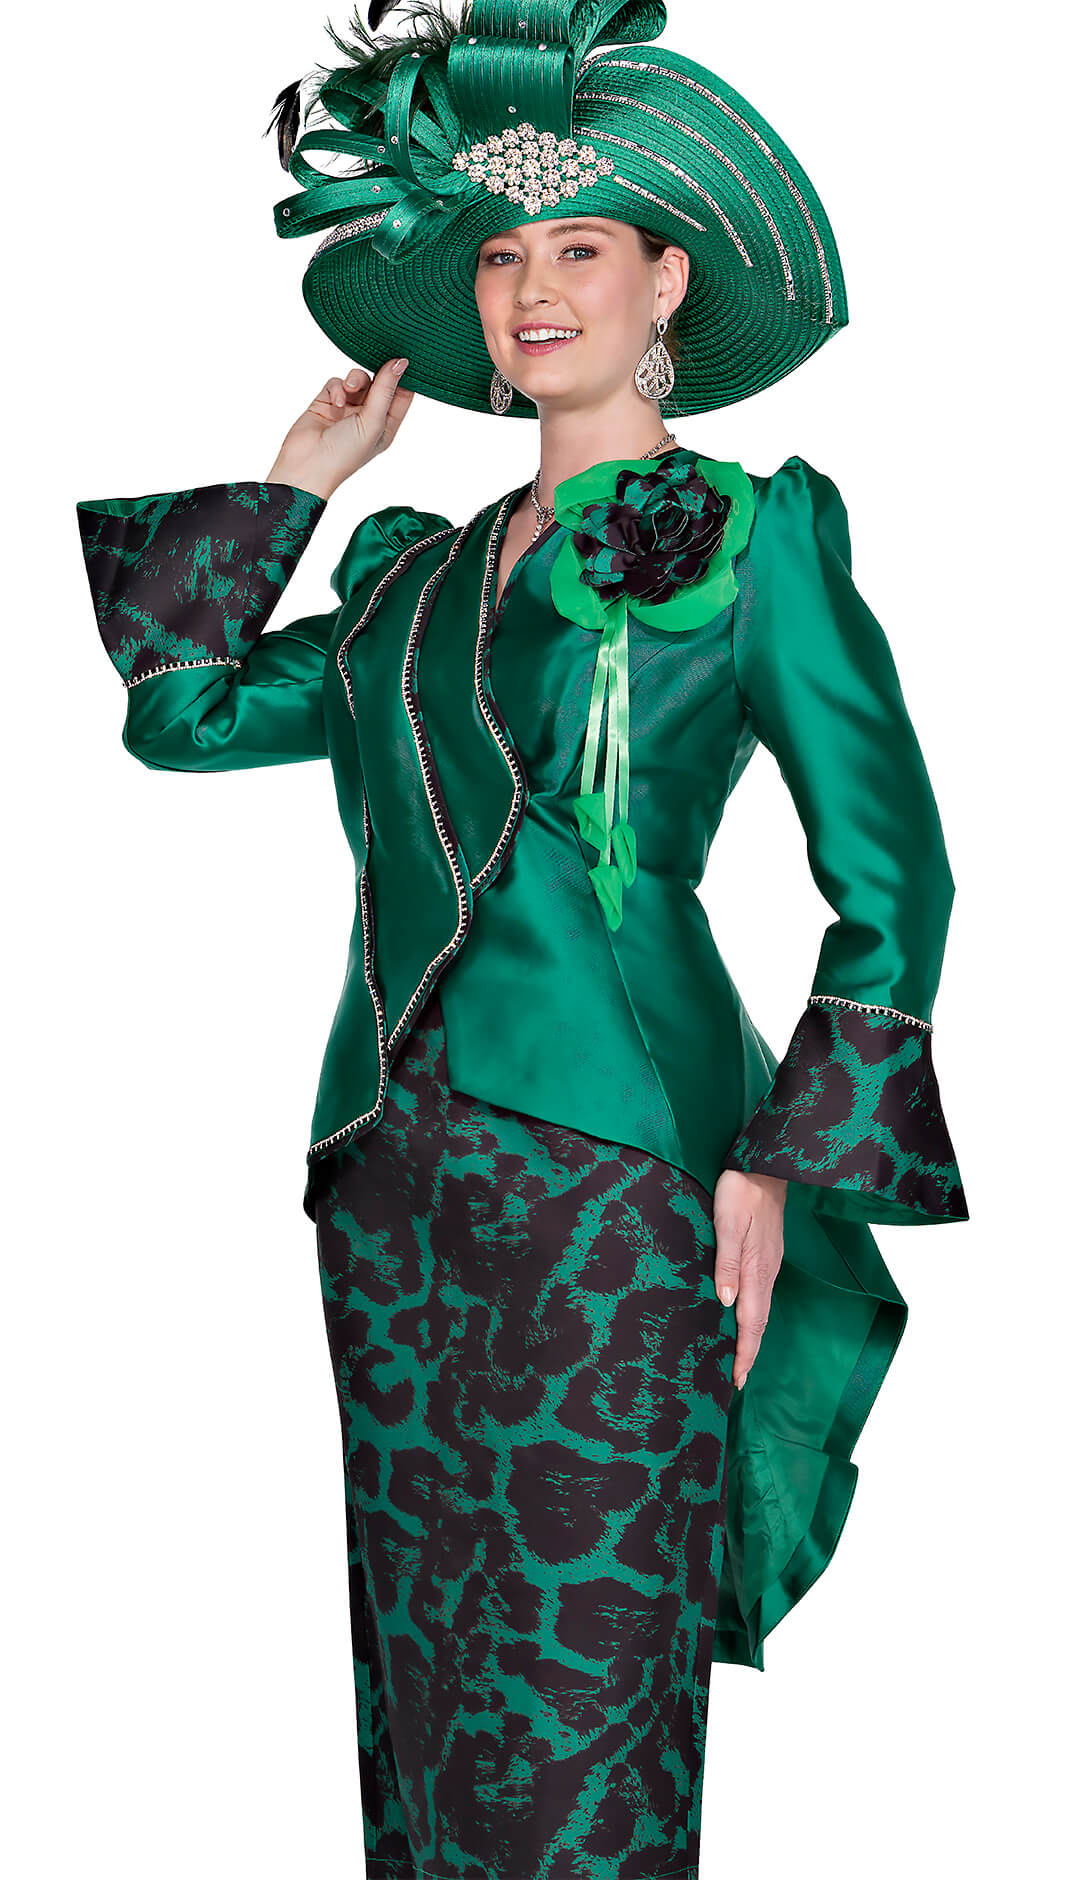 Elite Champagne Church Suit 5974-Green - Church Suits For Less